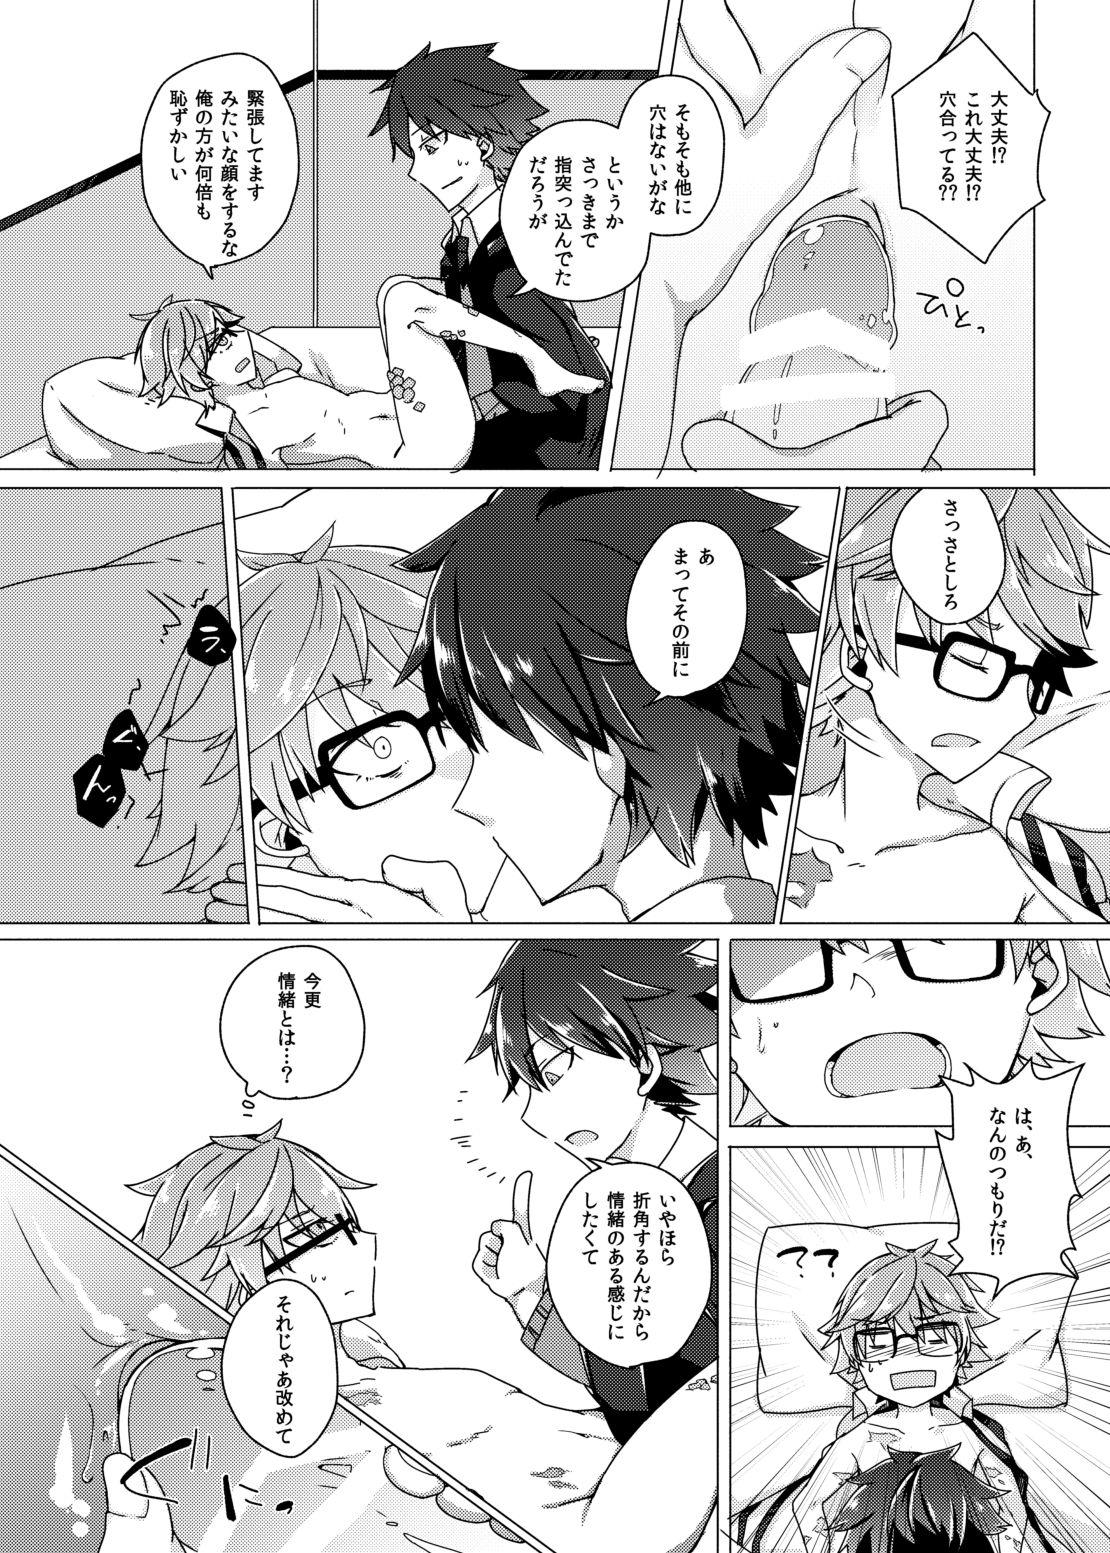 Clit ぐだデル寄稿まんが再録 - Fate grand order Sesso - Page 8